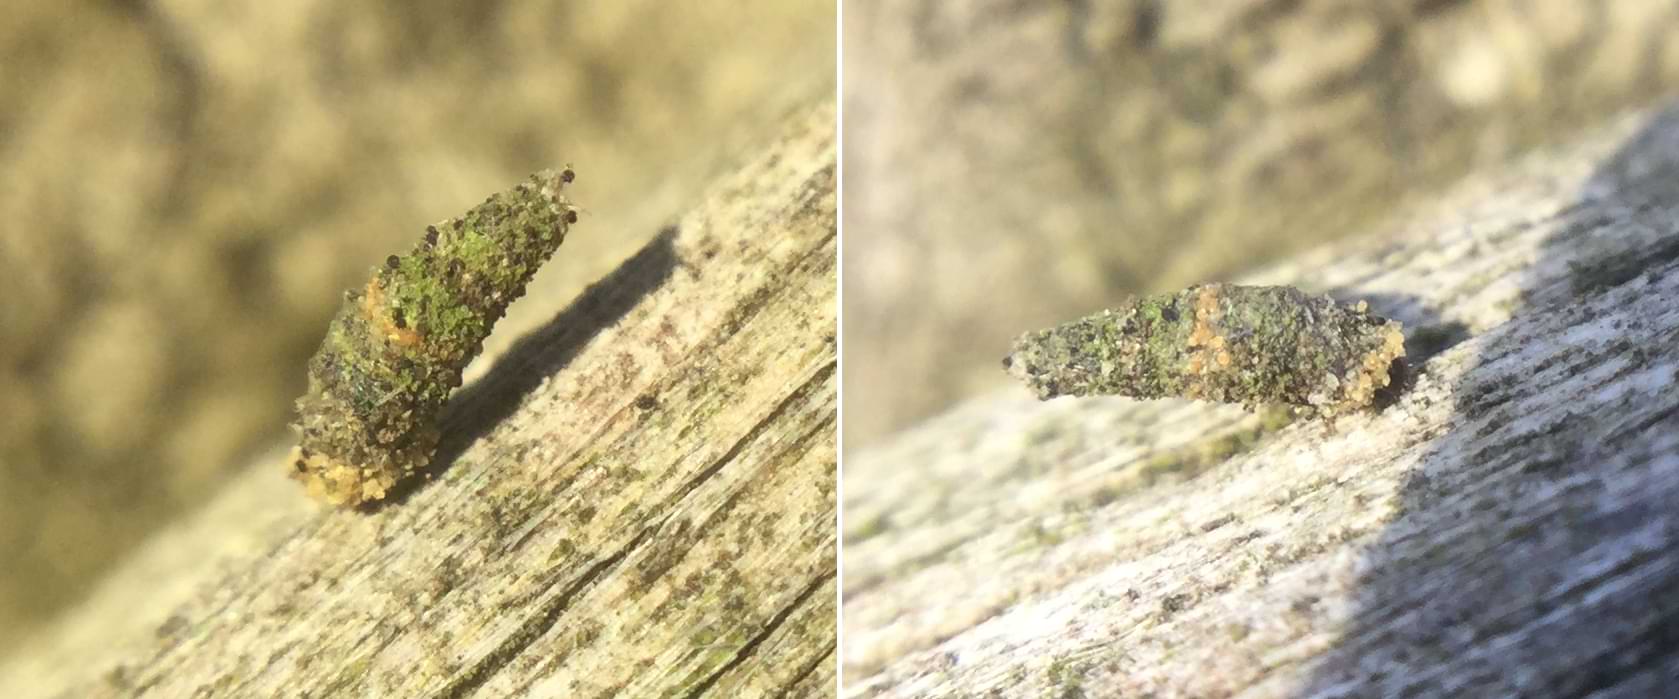 Two photos of a bagworm's cone-shaped case on a beam of wood. The case is curved and bumpy, and has rings of lighter and darker brown running around its circumference. In one of the photos, the bagworm's head is barely visible from underneath the hood of the case.